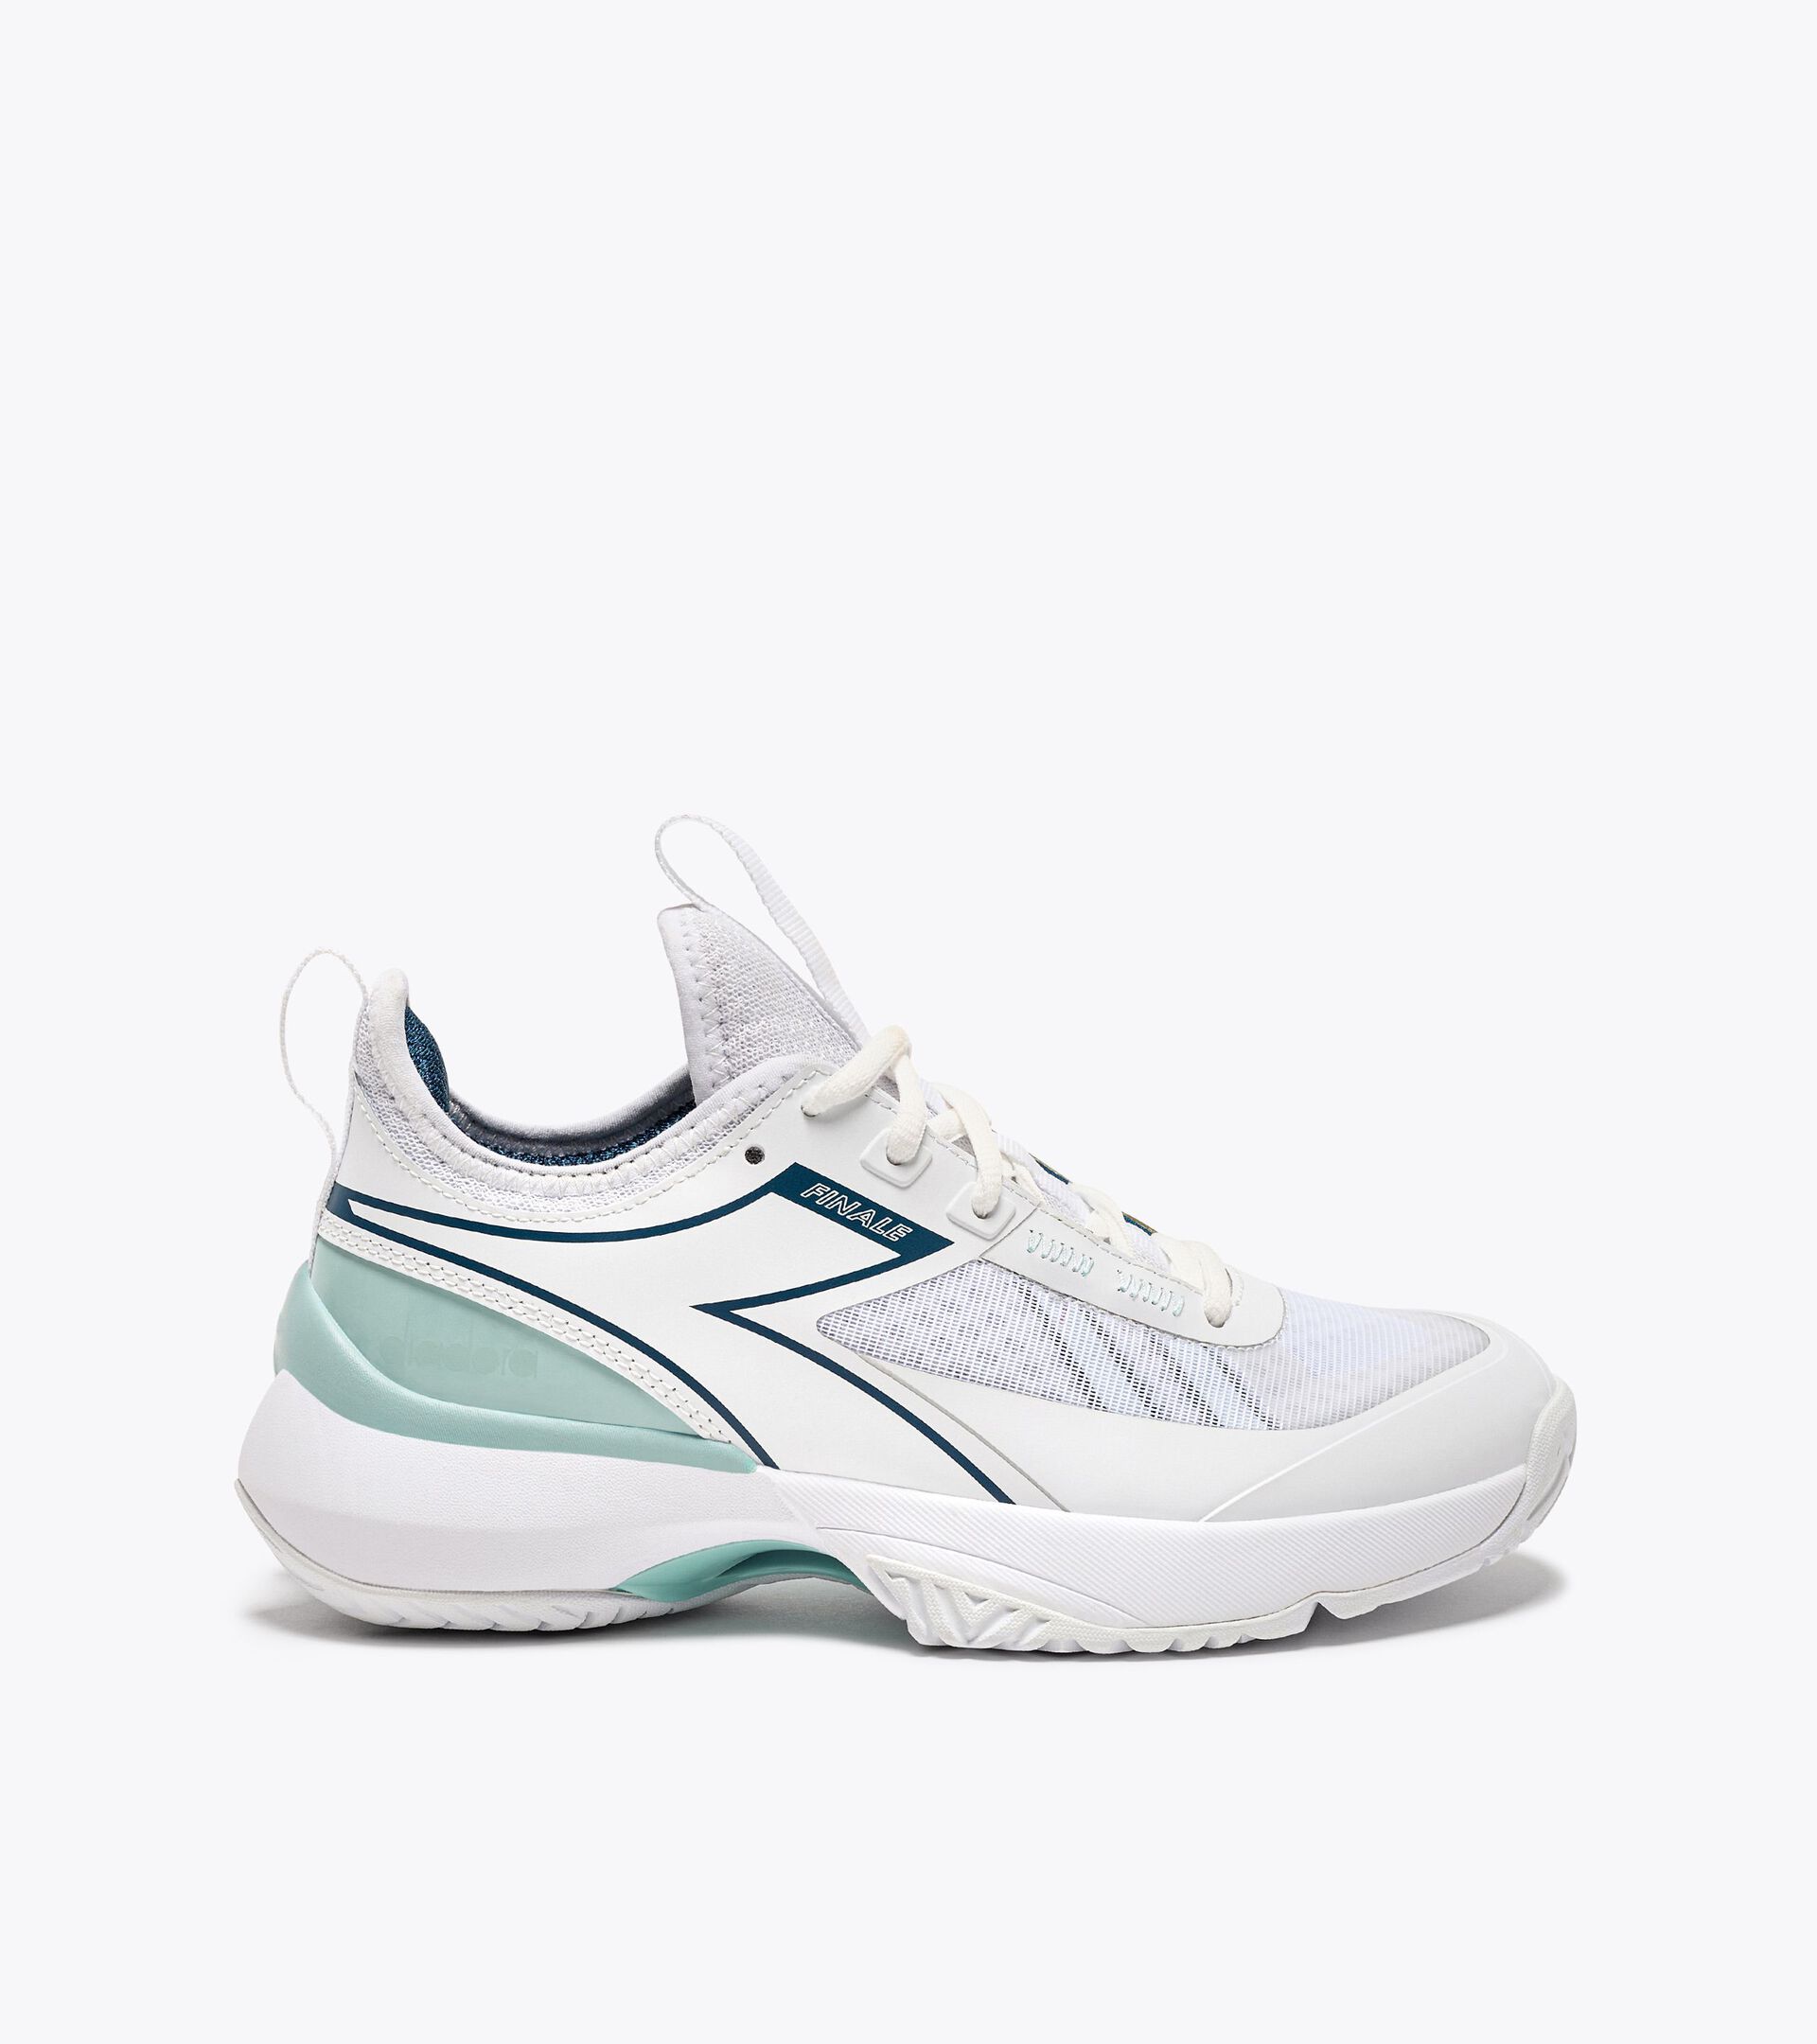 Tennis shoes for hard surfaces or clay courts - Women FINALE W AG WHITE/LEGION BLUE/SURF SPRAY - Diadora